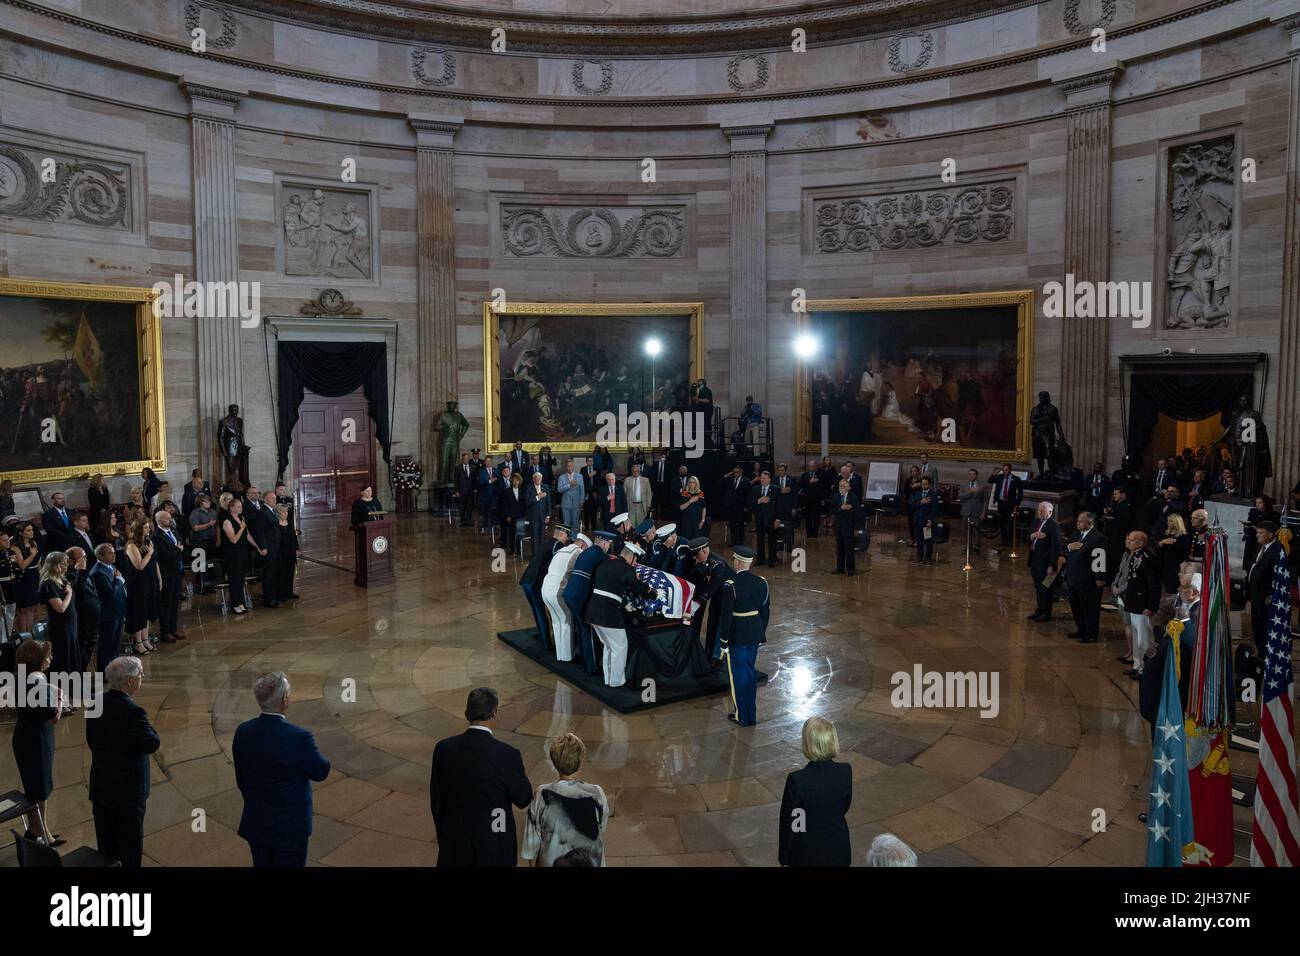 The casket of Marine Chief Warrant Officer 4 Hershel Woodrow “Woody” Williams, the last surviving World War II Medal of Honor recipient, lies in honor in the Rotunda of the US Capitol, in Washington, DC, USA, 14 July 2022. The Marine Corps veteran, who died June 29th, was awarded the nation's highest award for his actions on Iwo Jima.Credit: Eric Lee/Pool via CNP /MediaPunch Stock Photo